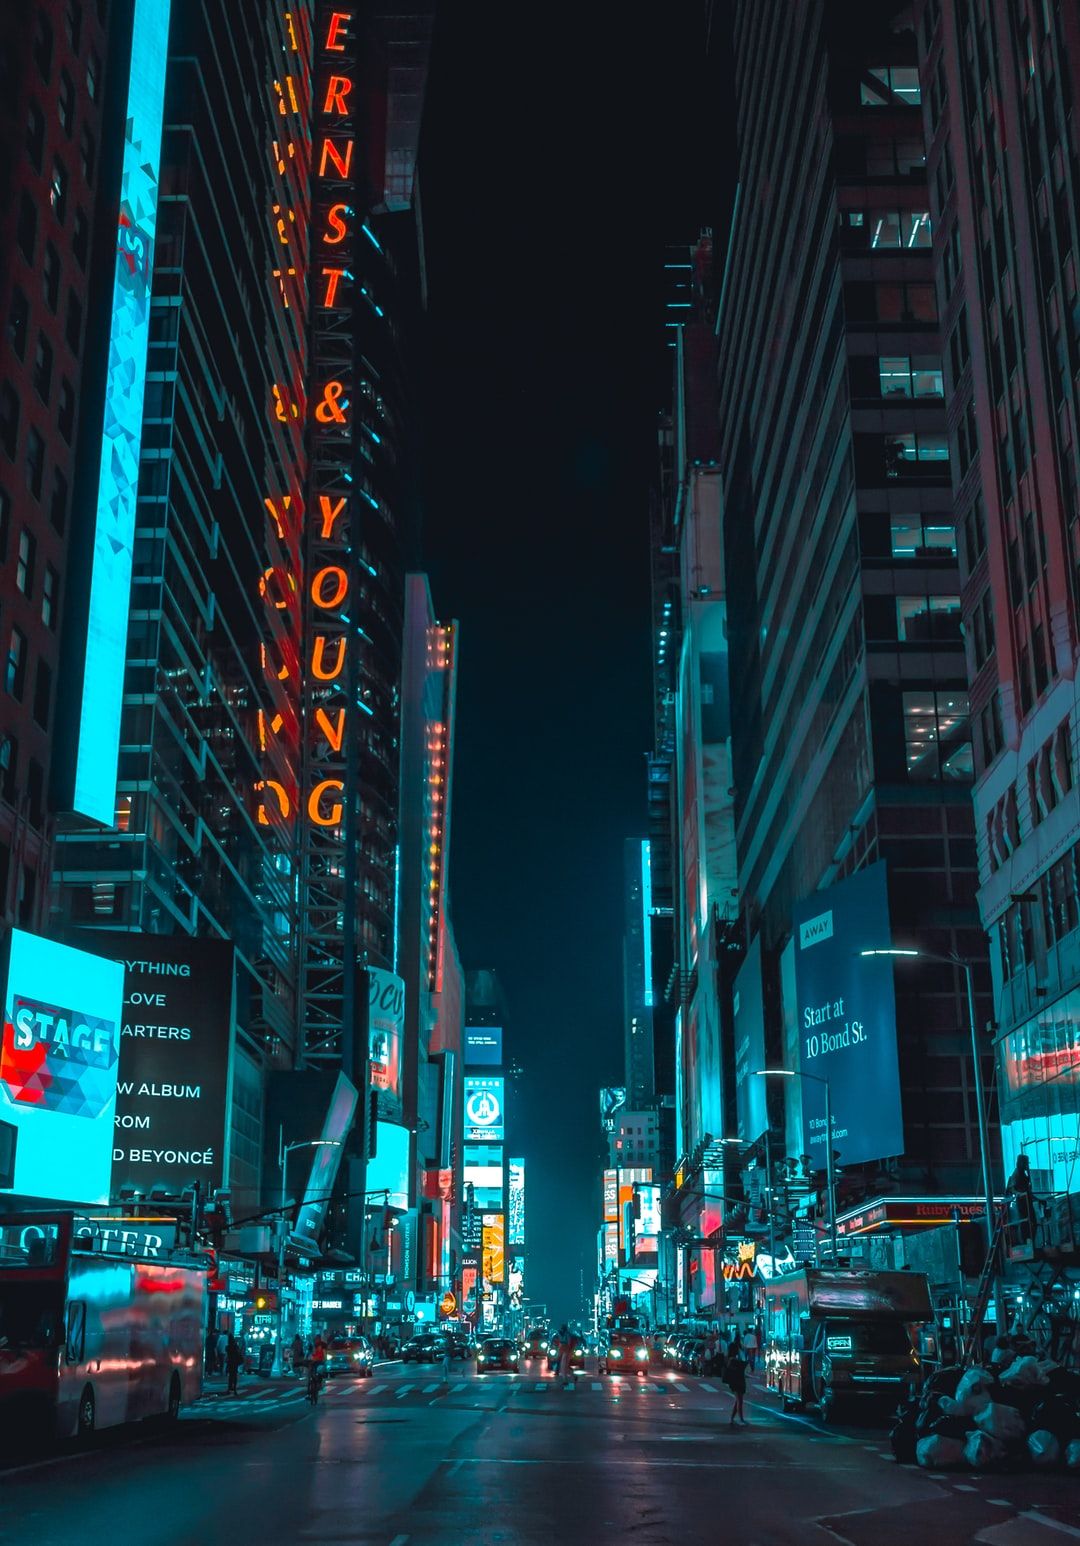 A city street at night with neon lights - New York